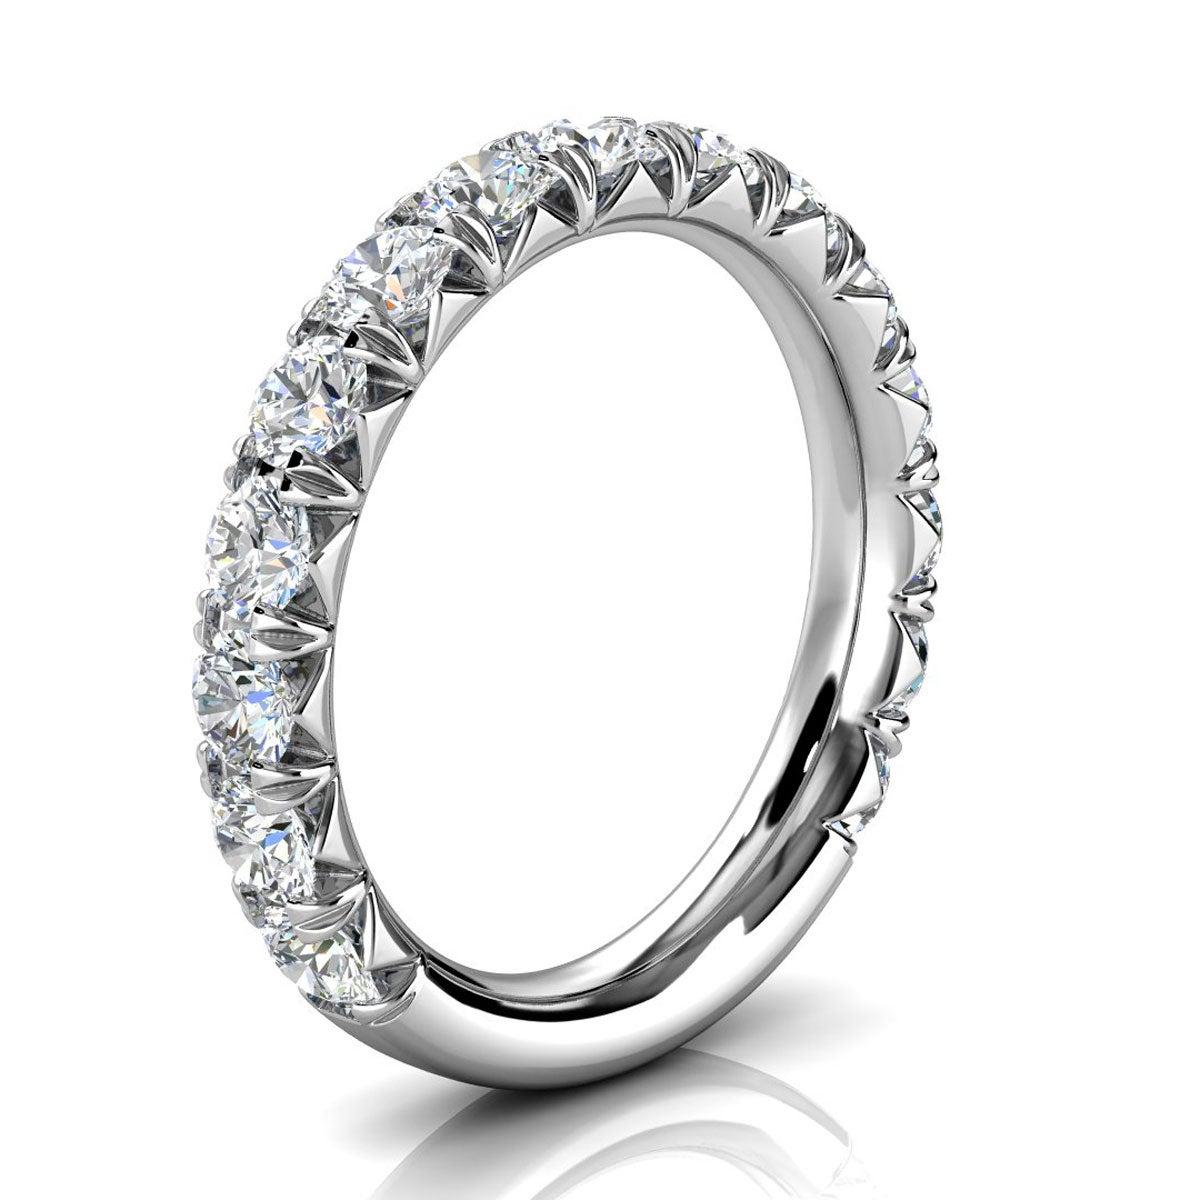 For Sale:  18K White Gold GIA French Pave Diamond Ring '1 1/2 Ct. tw' 2